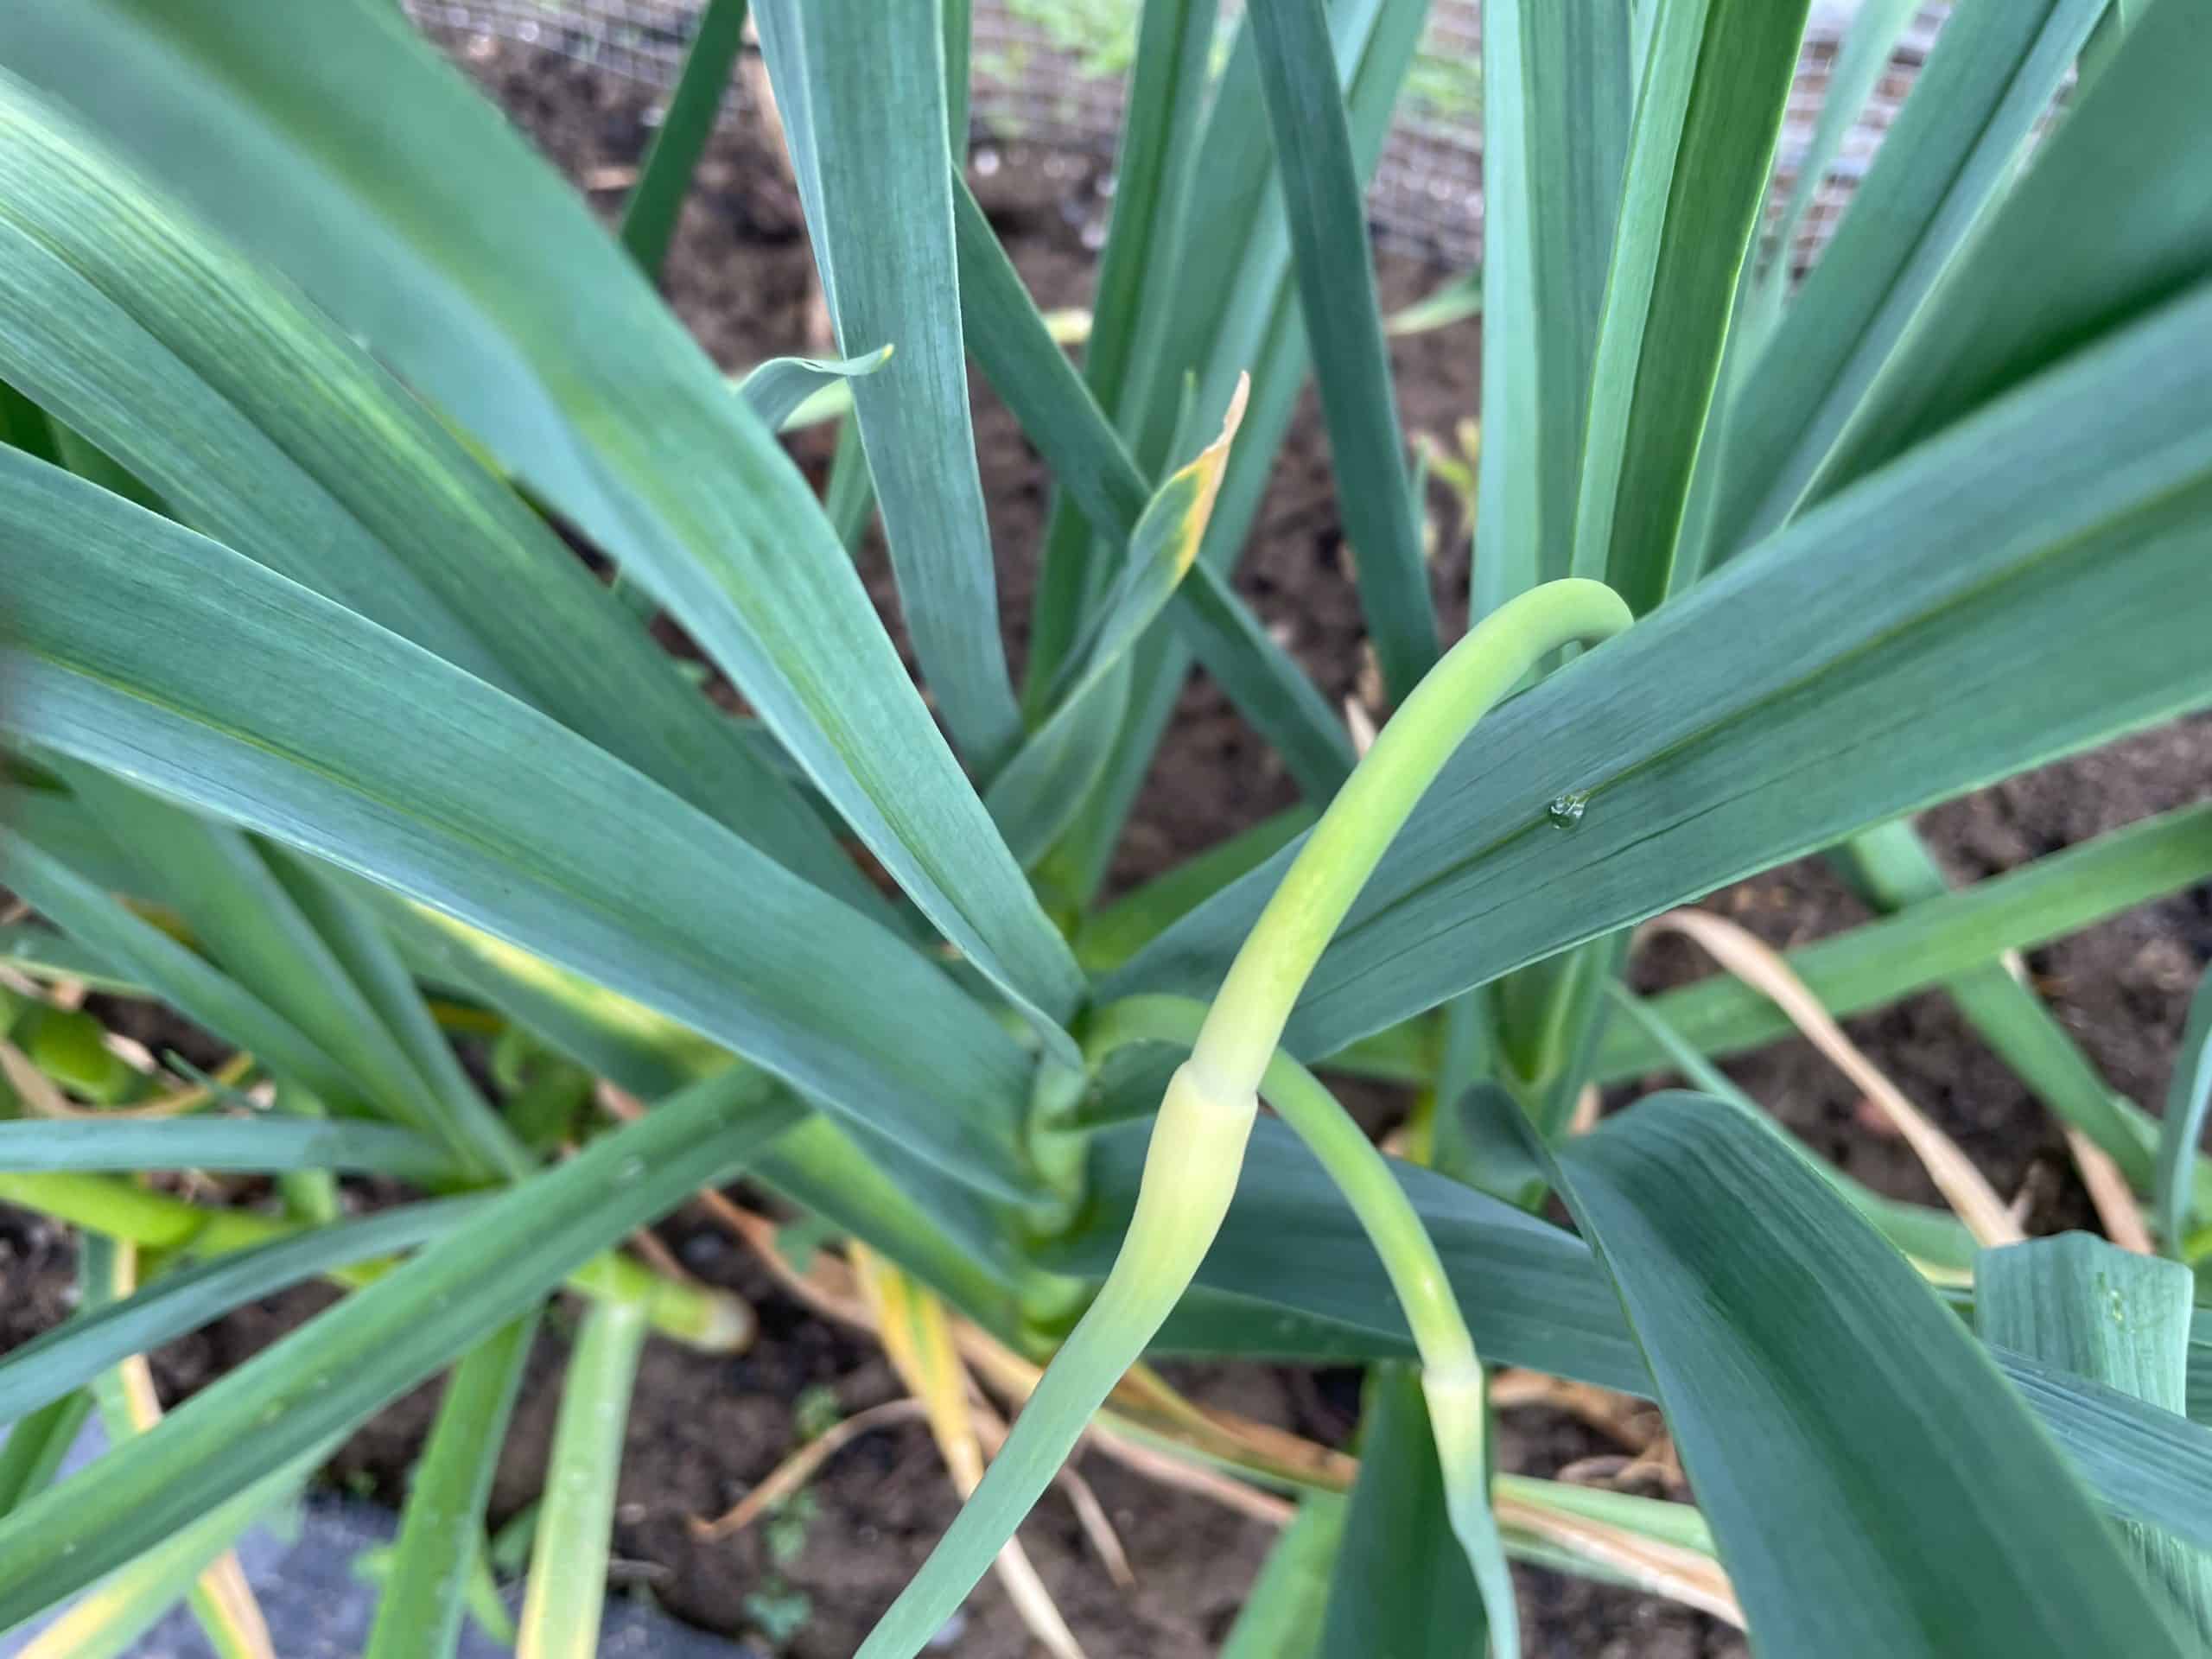 Garlic scapes ( first sign of the garlic season)